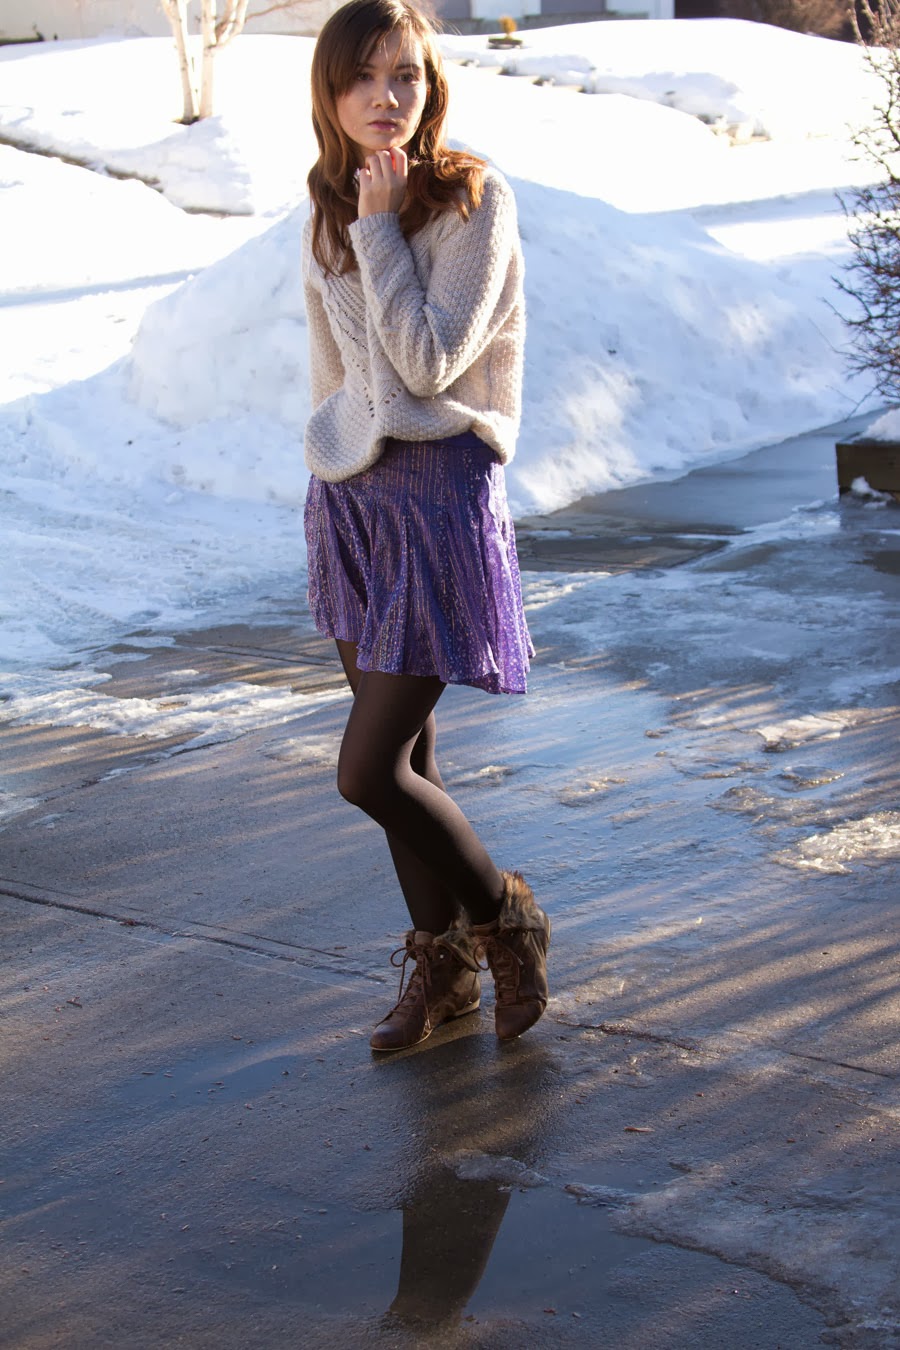 Winter Skirt, winter fashion, spring fashion, boots, american eagle, h&m, marc jacobs, michael kors watch